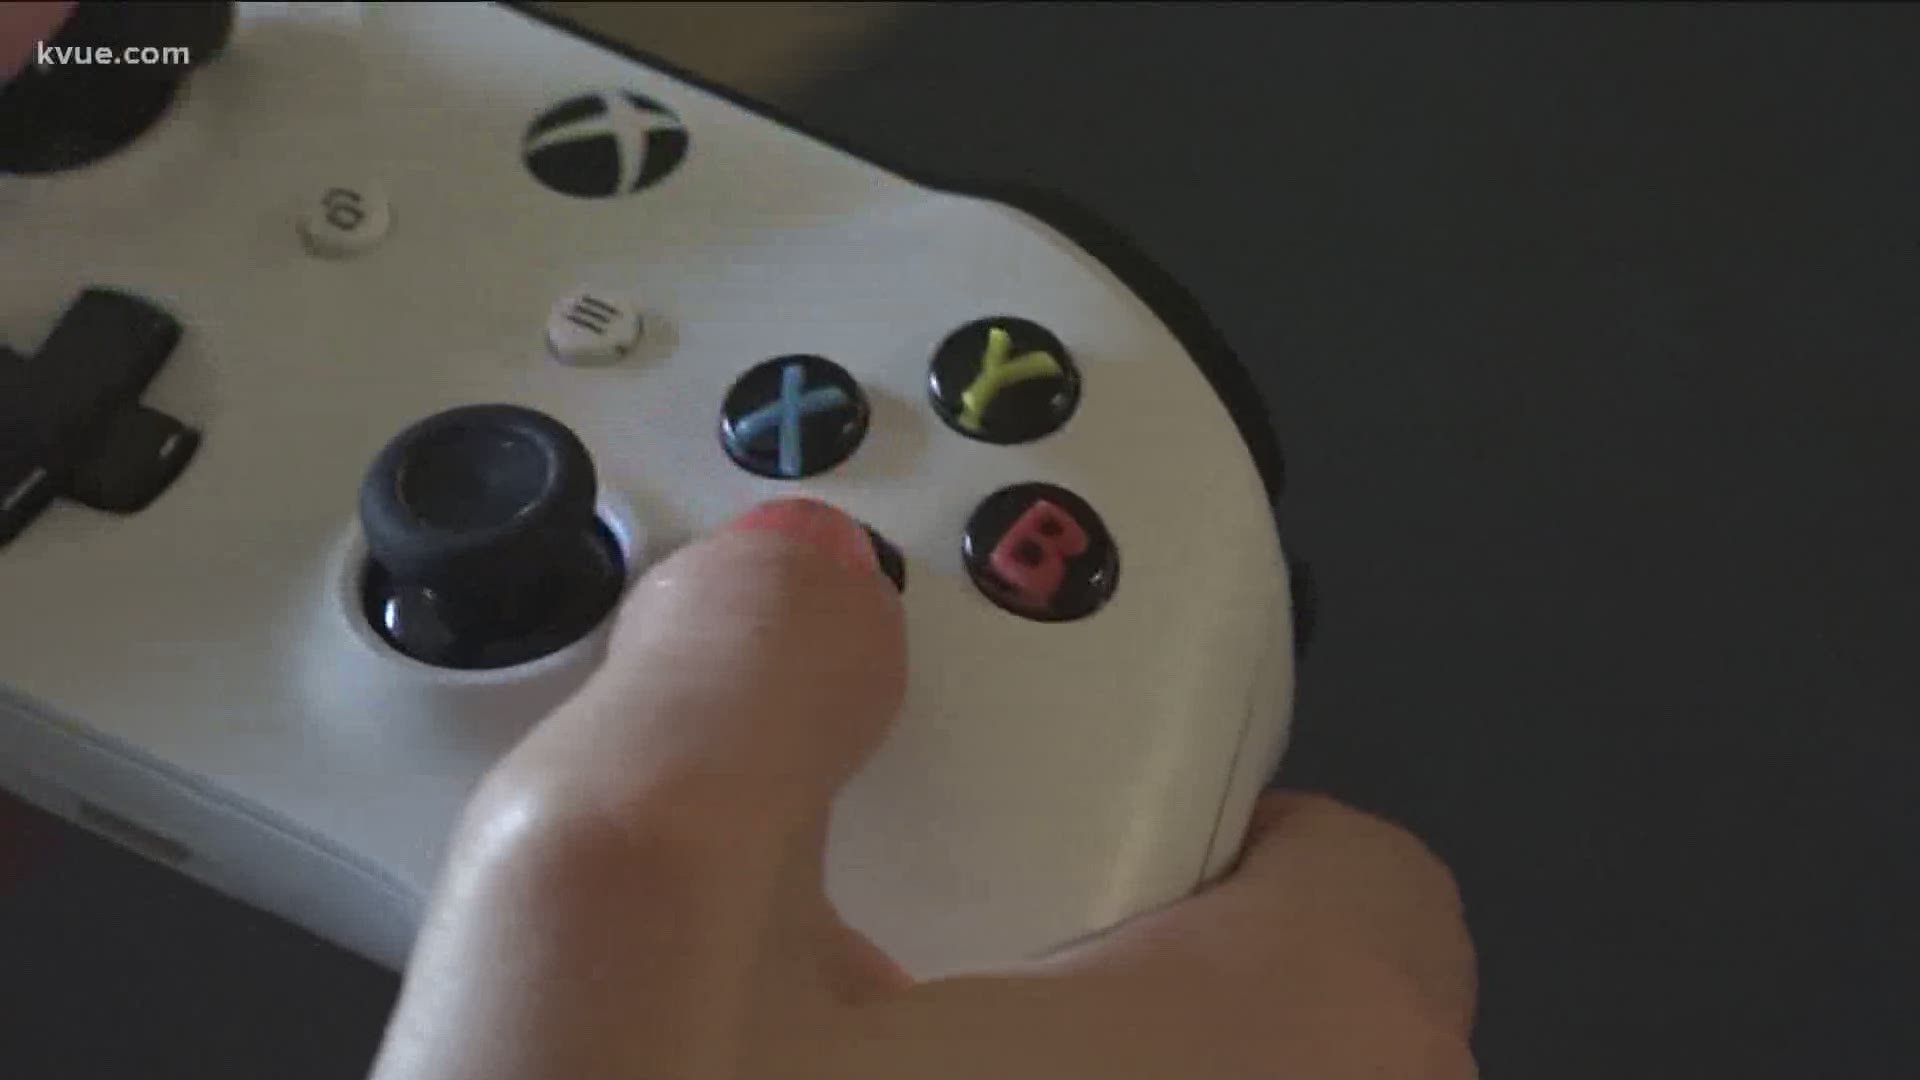 A lot more people are turning to video games to stay entertained while at home. The demand has led to job growth in Central Texas.